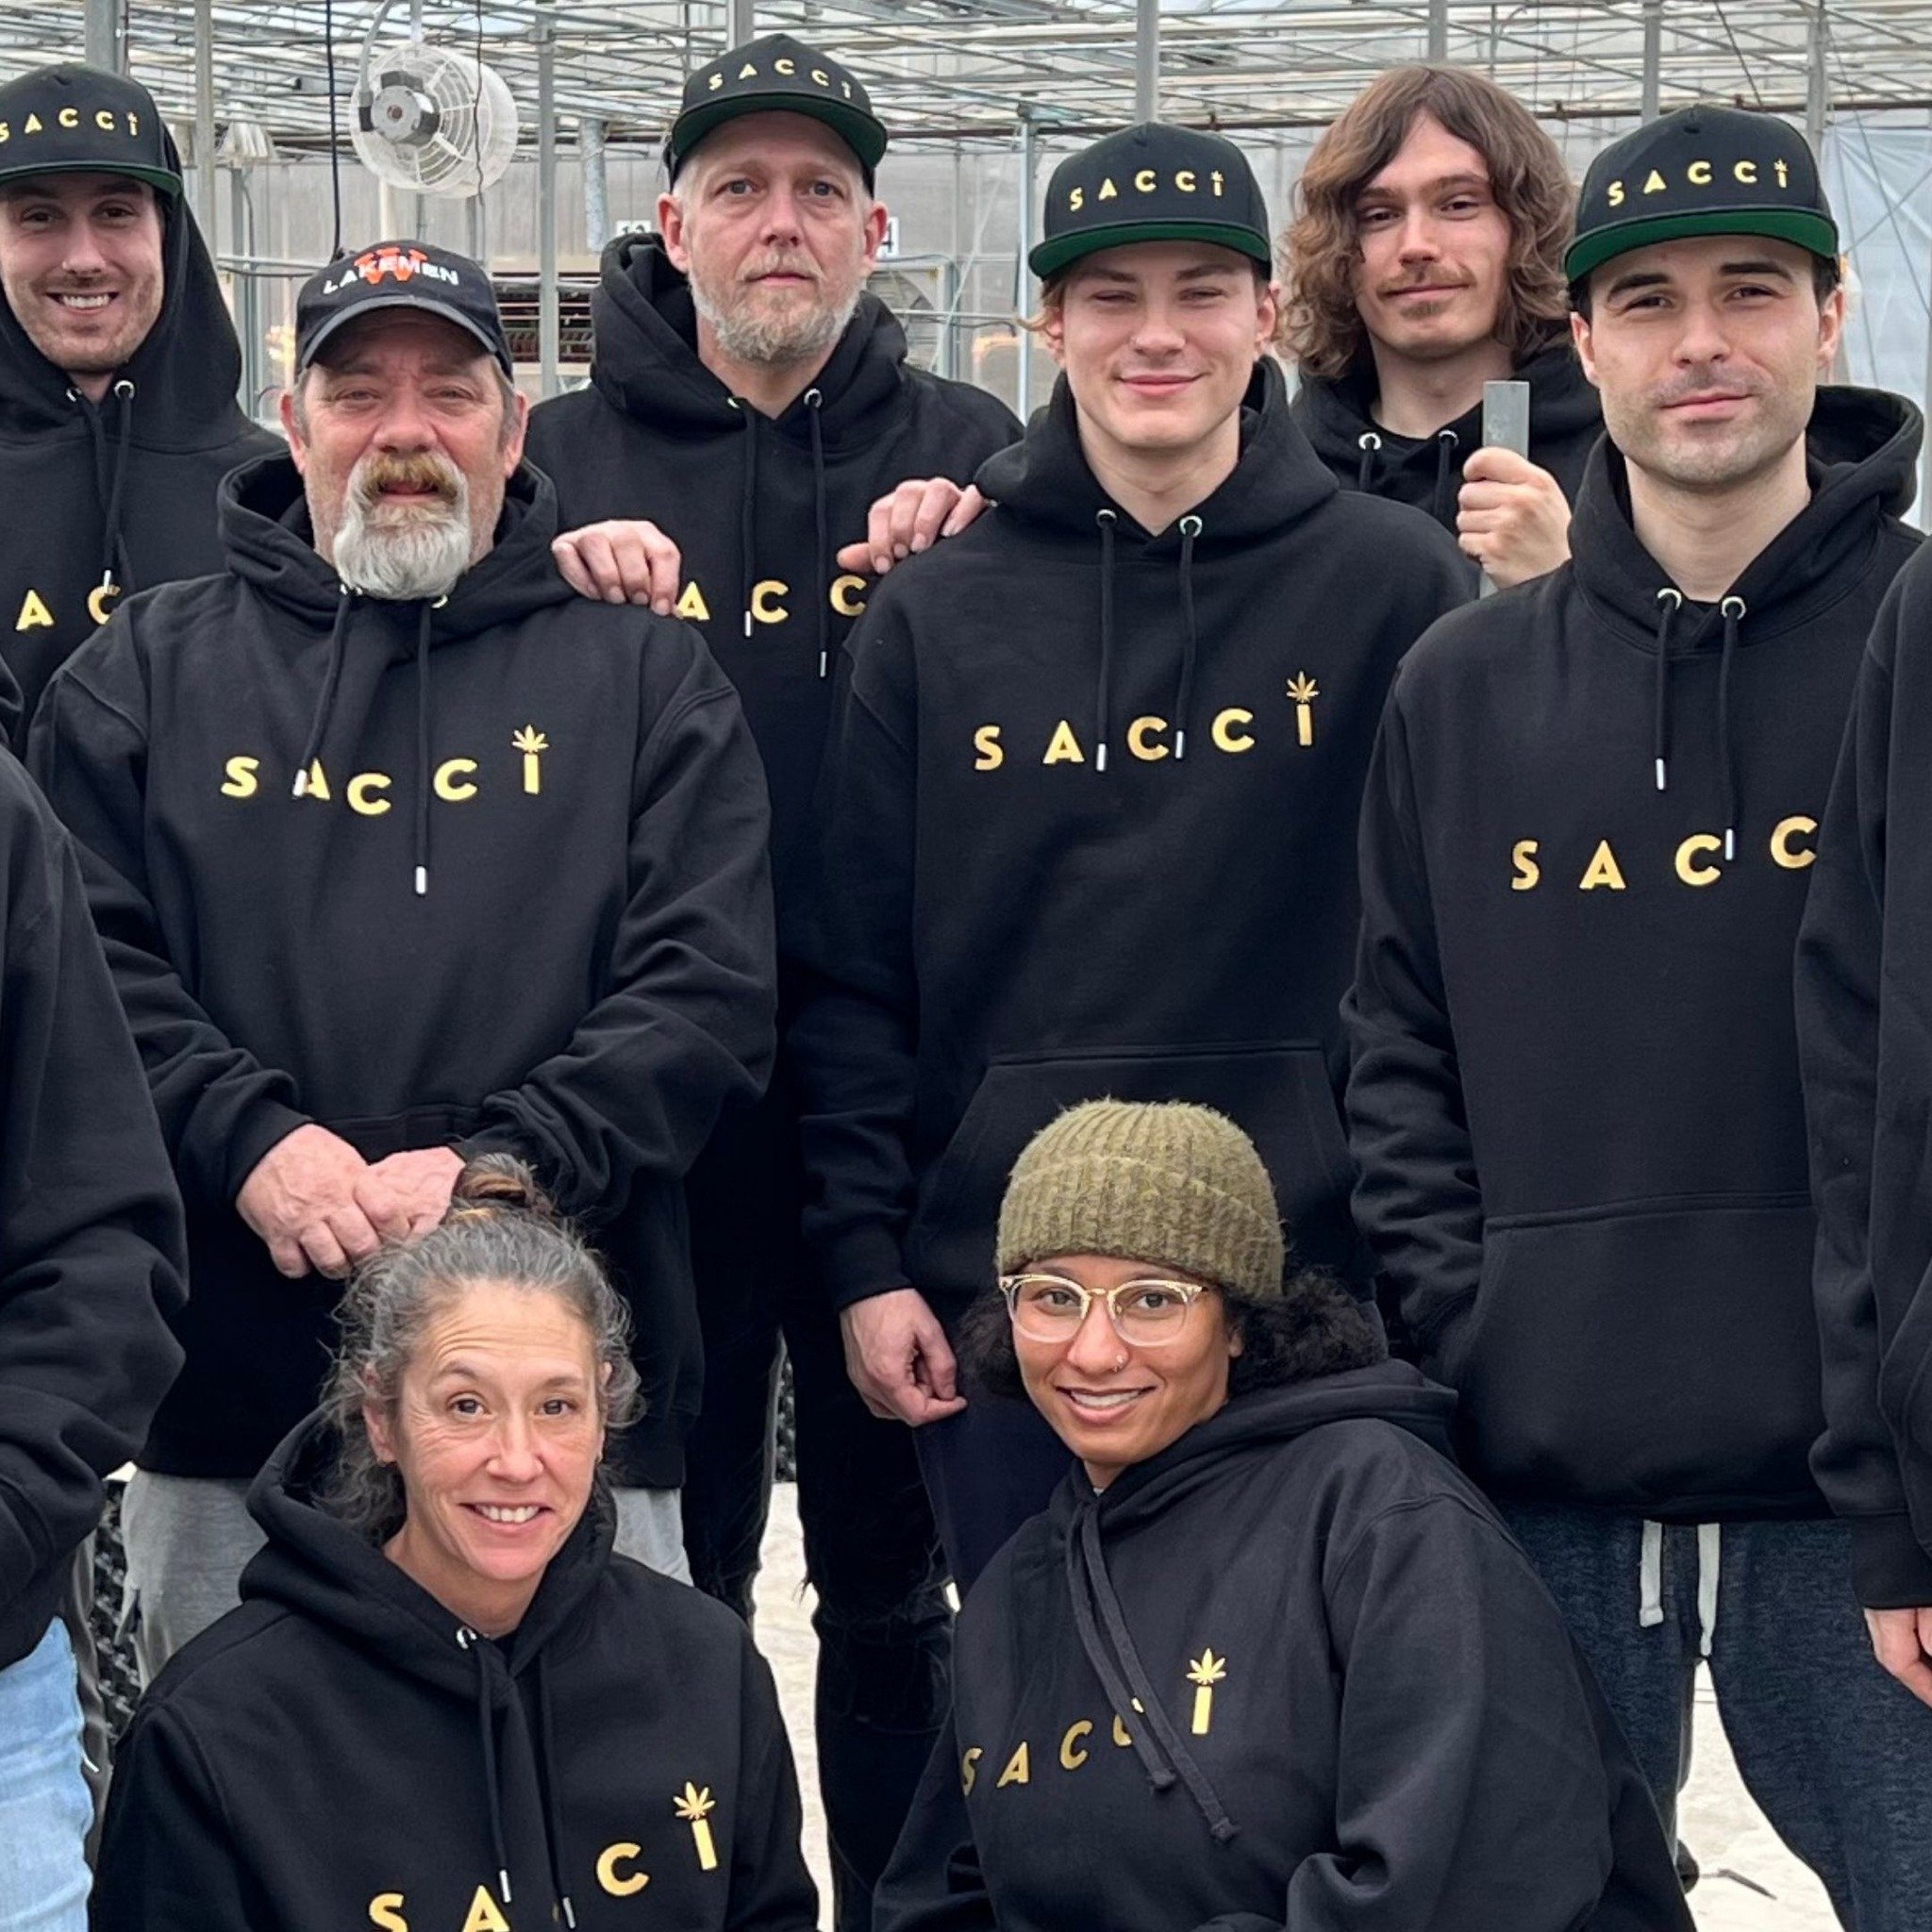 Get your style on with our House of Sacci Hoodies! 

Show New York how you roll with our exclusive collection. Available now at houseofsacci.com/merch.

#NewYorkFashion #BrandMerch #hoodies  #houseofsacci